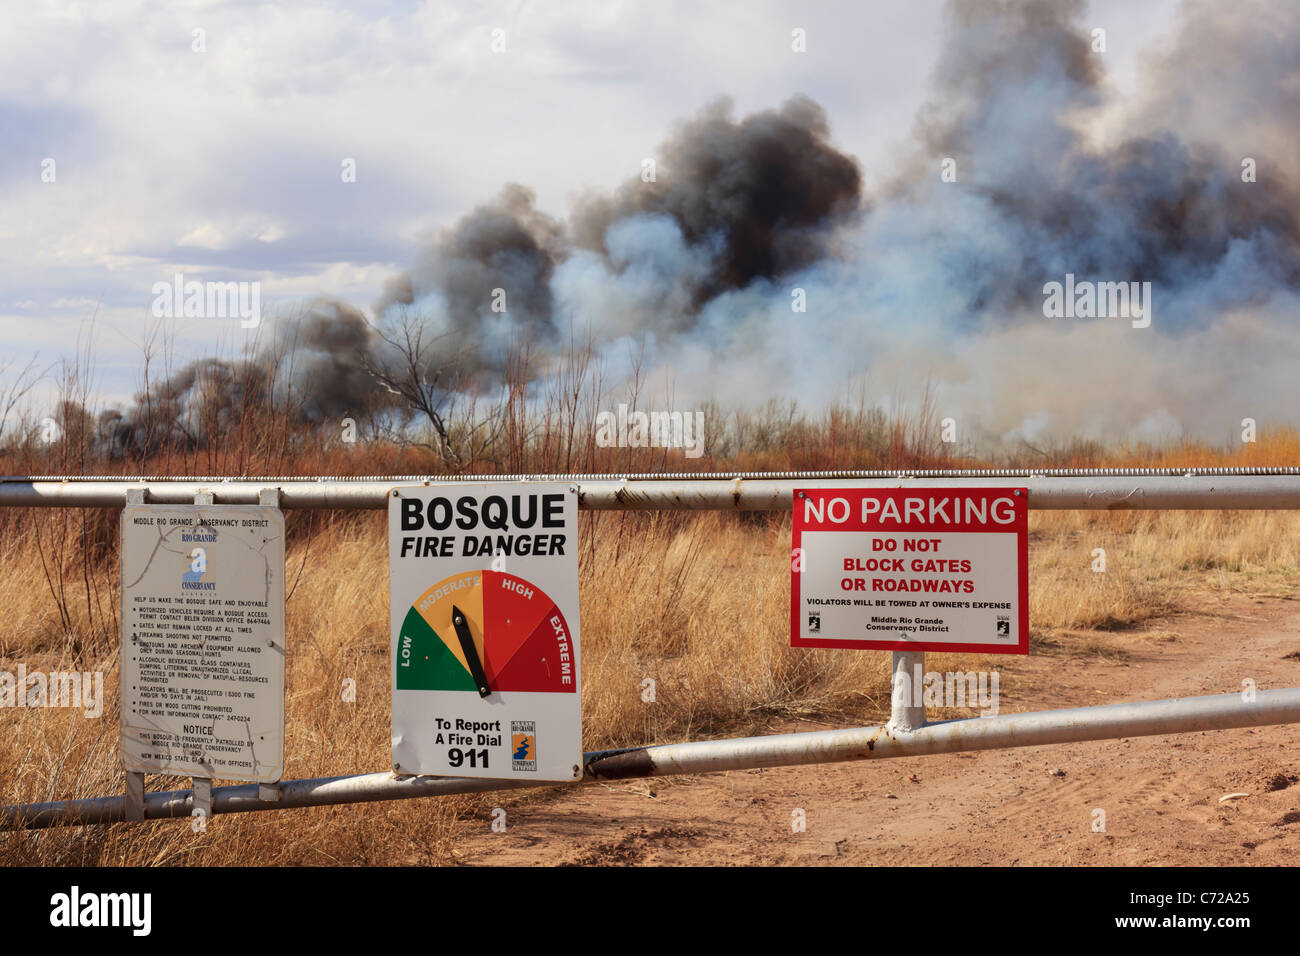 A fire danger sign and gate in rural New Mexico with wildfire burning in the background. Stock Photo